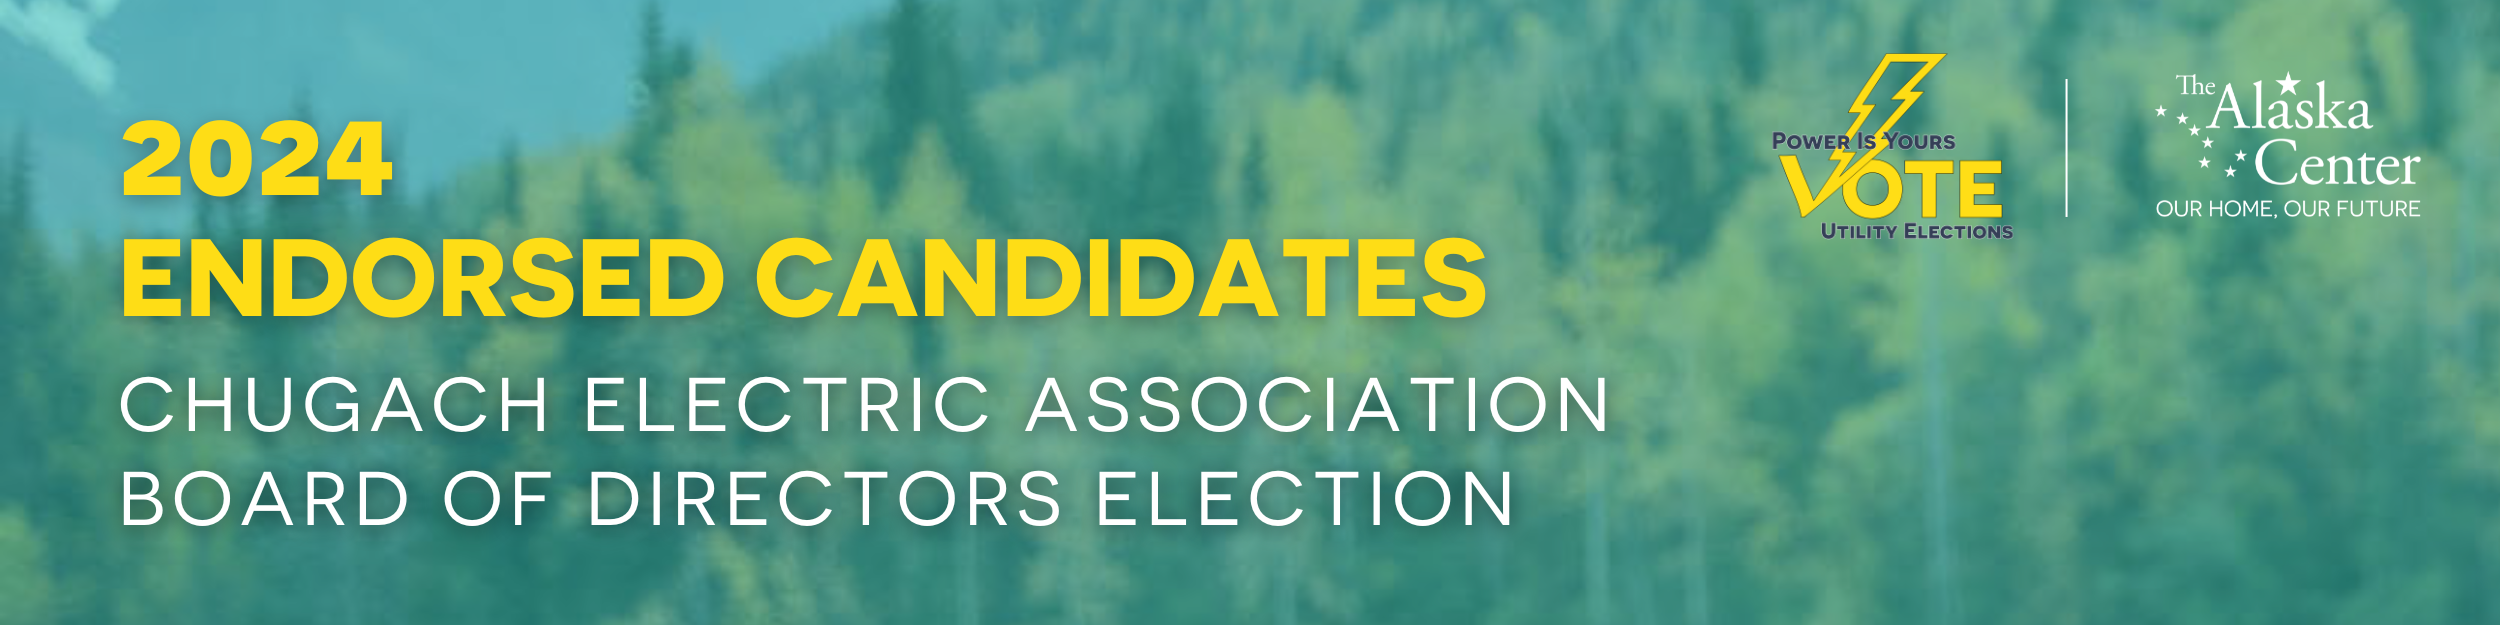 Featured image for “2024 Chugach Electric Association Endorsements”